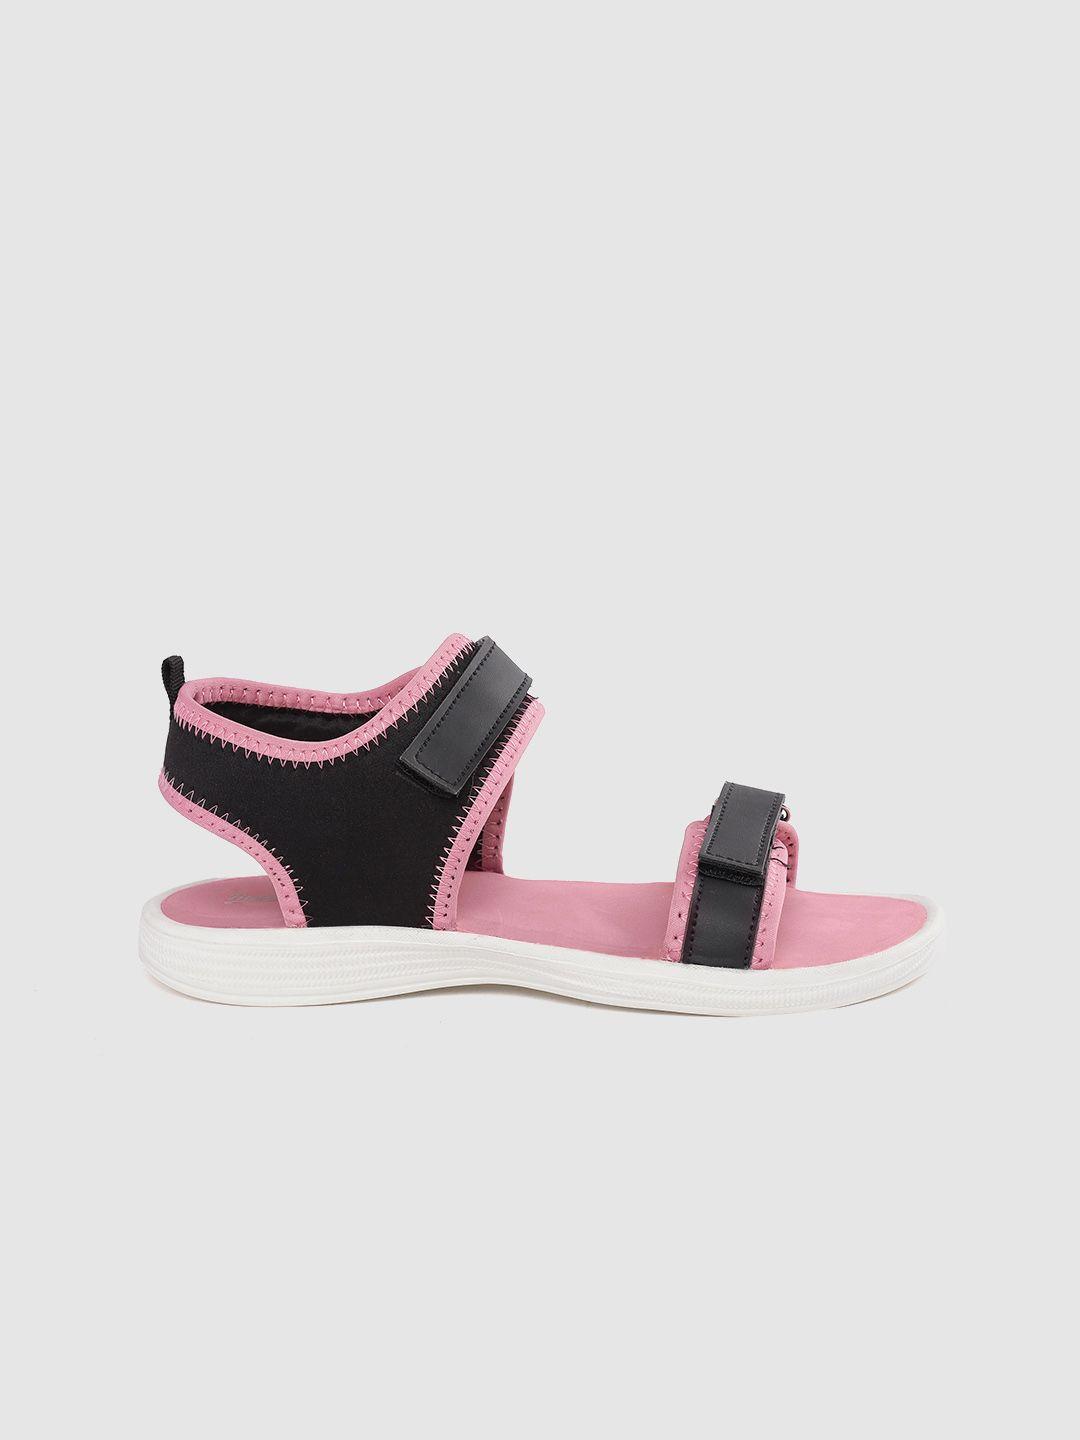 the roadster lifestyle co women black & dusty pink solid sports sandals